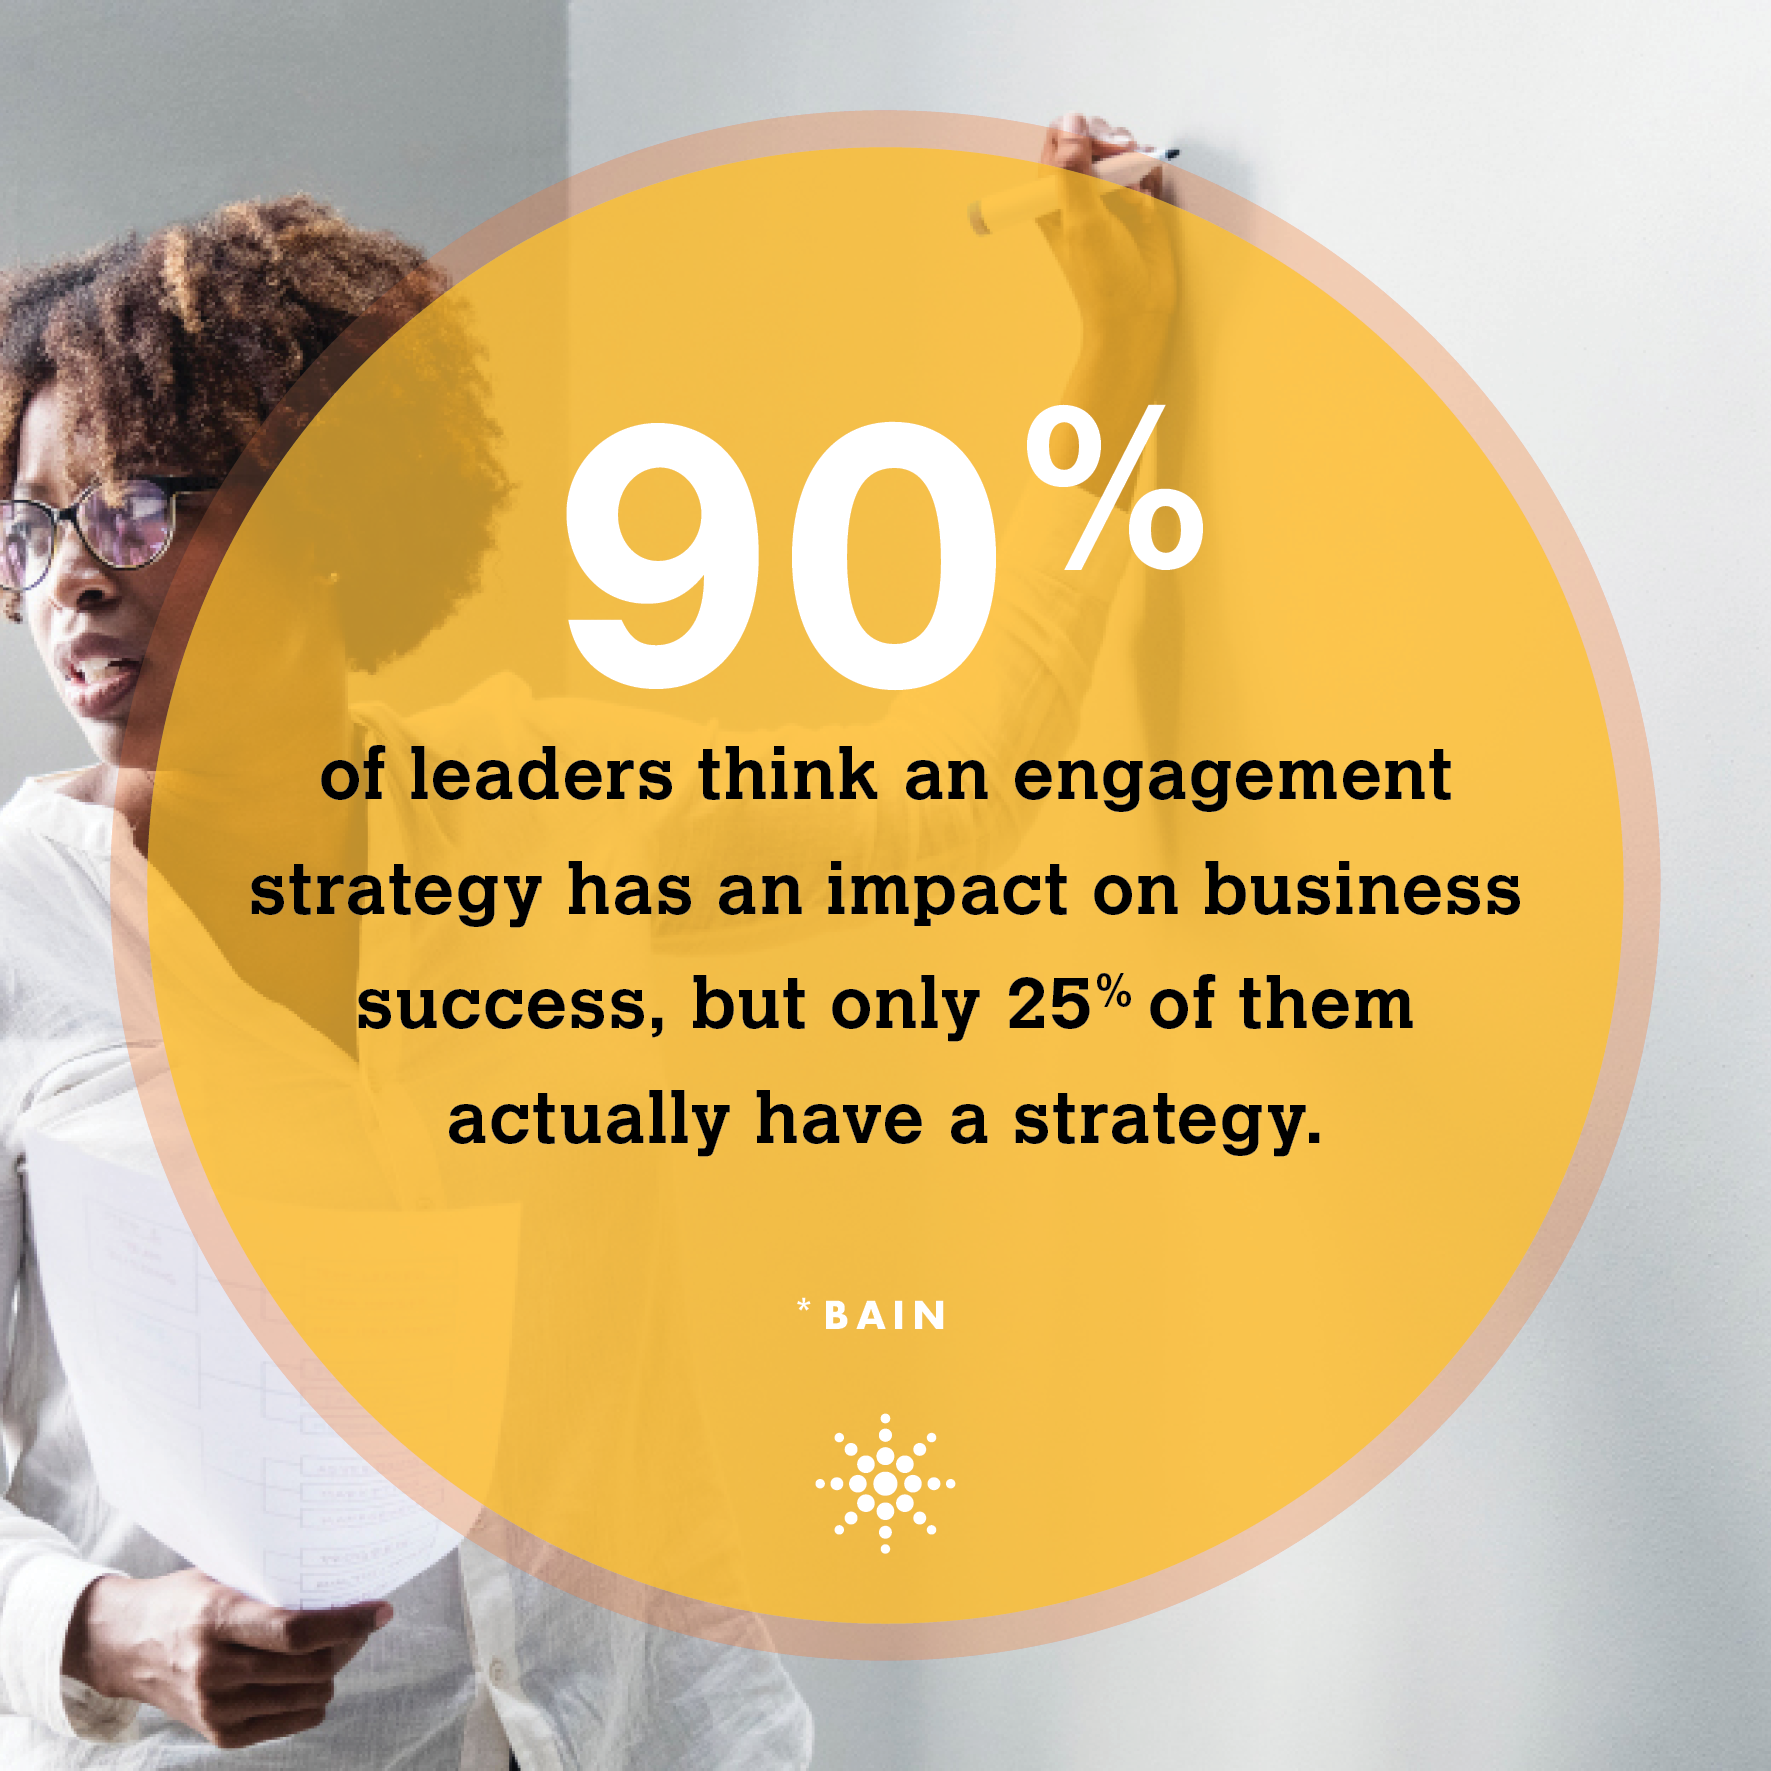 90% of leaders think an engagement strategy has an impact on business success, but only 25% of them actually have a strategy.